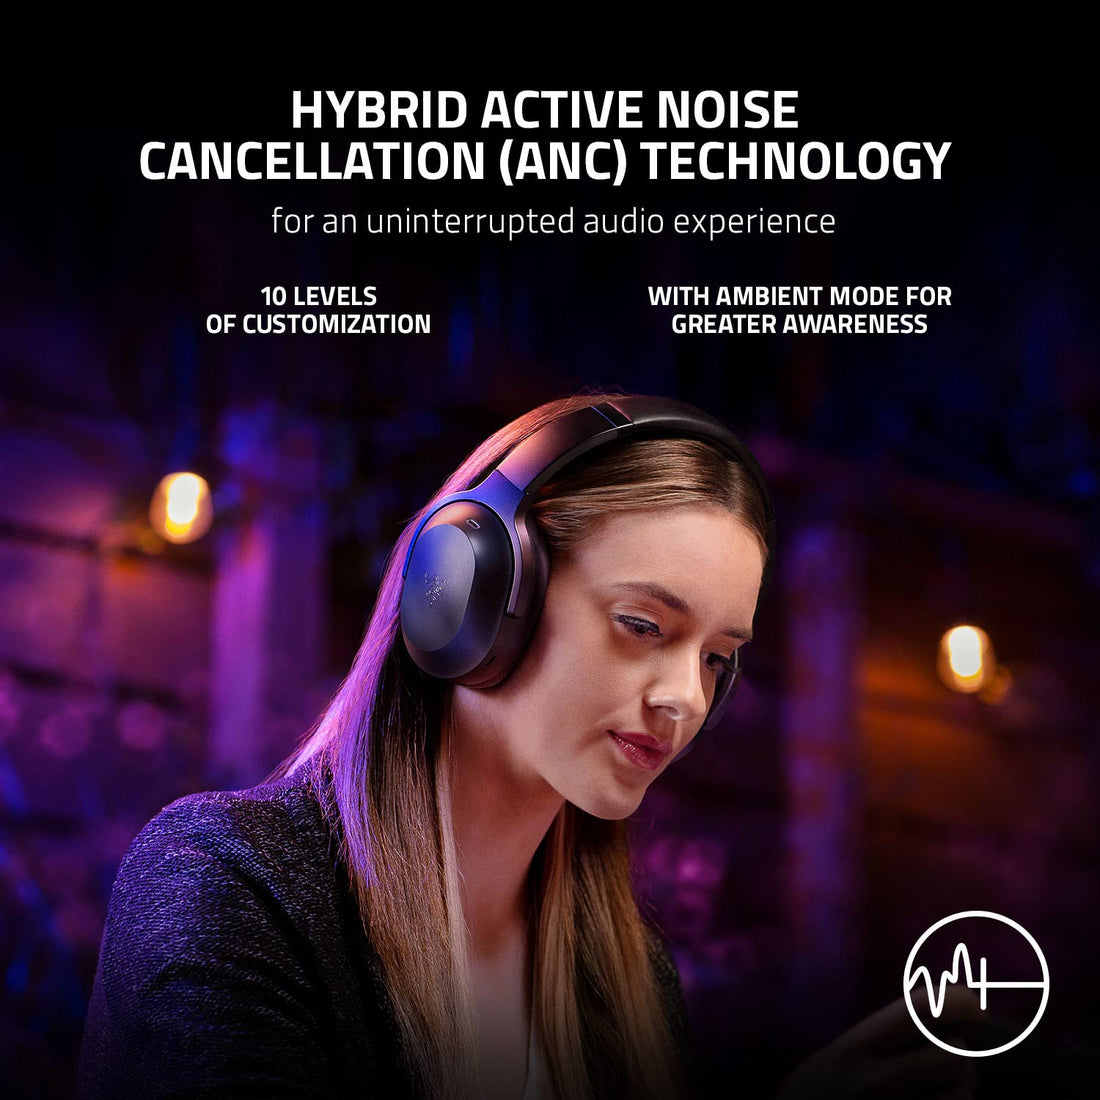 Razer Barracuda Pro Wireless Gaming&Mobile Headset (Pc,Playstation,Switch,Android,iOS):Hybrid ANC- 2.4Ghz Wireless+ Bluetooth- THX Aaa-50Mm Drivers- Mic-40Hr Battery-Black-Rz04-03780100-R3M1,Over Ear